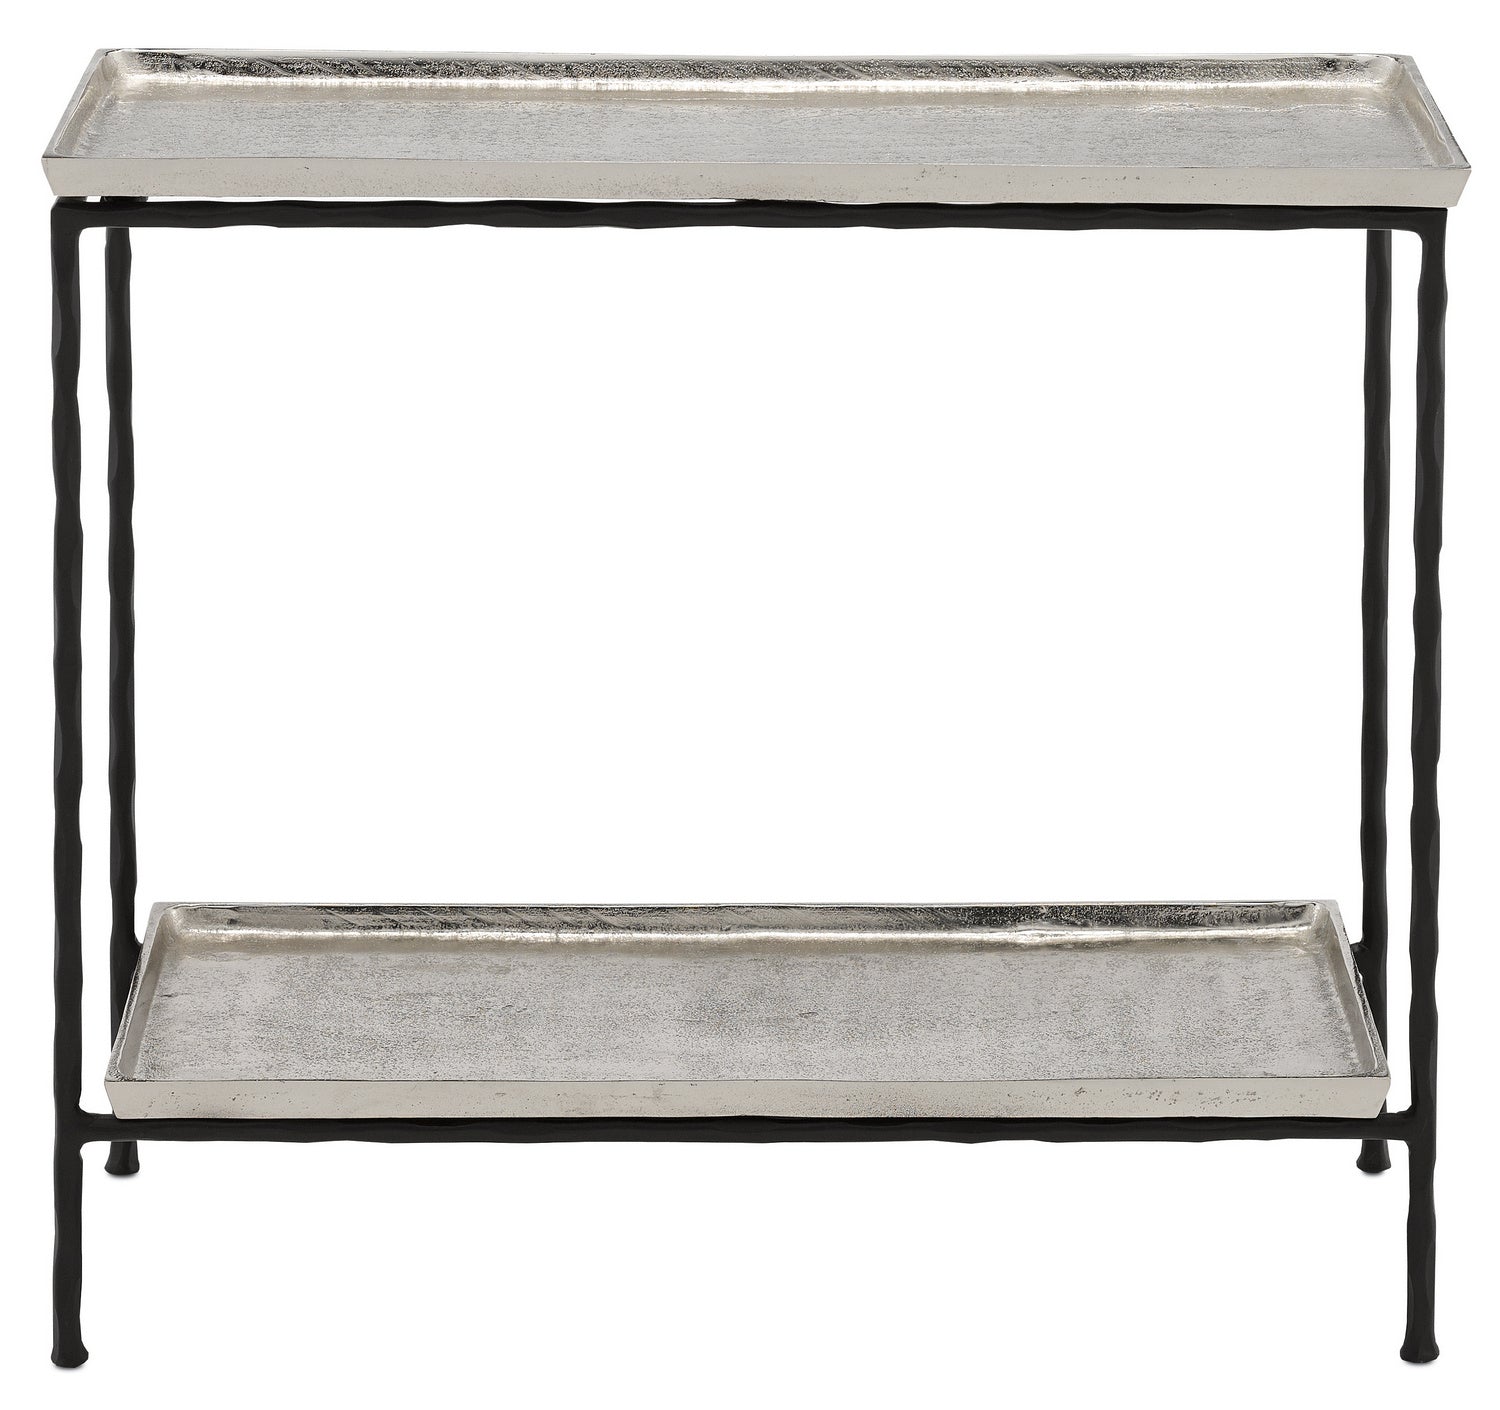 Side Table from the Boyles collection in Antique Silver/Black finish